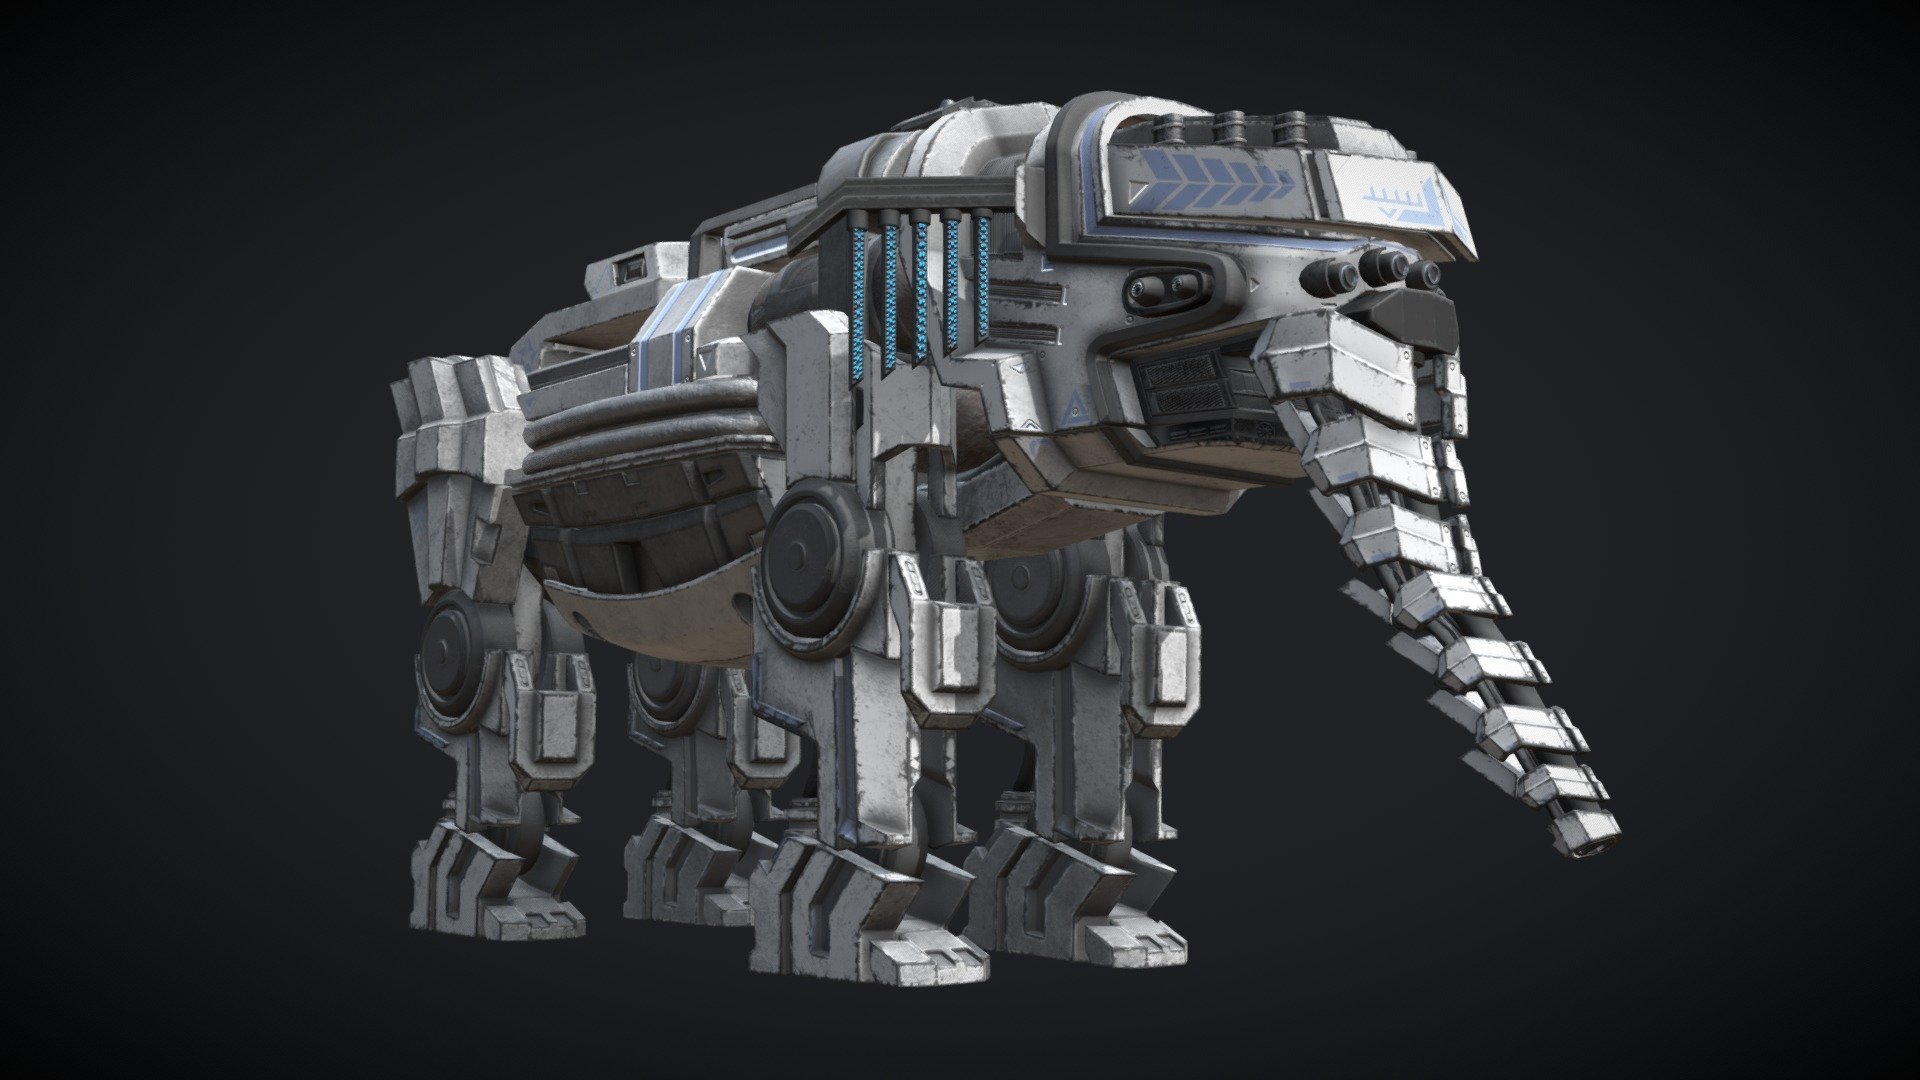 Was inspired by Horizon Zero Dawn and decided to make model like is there
PBR textures: 4096x4096
Polygons: 43,674
Vertices: 23,424
I hope you enjoy and like it :) - Robot Elephant - 3D model by DumitriyL 3d model